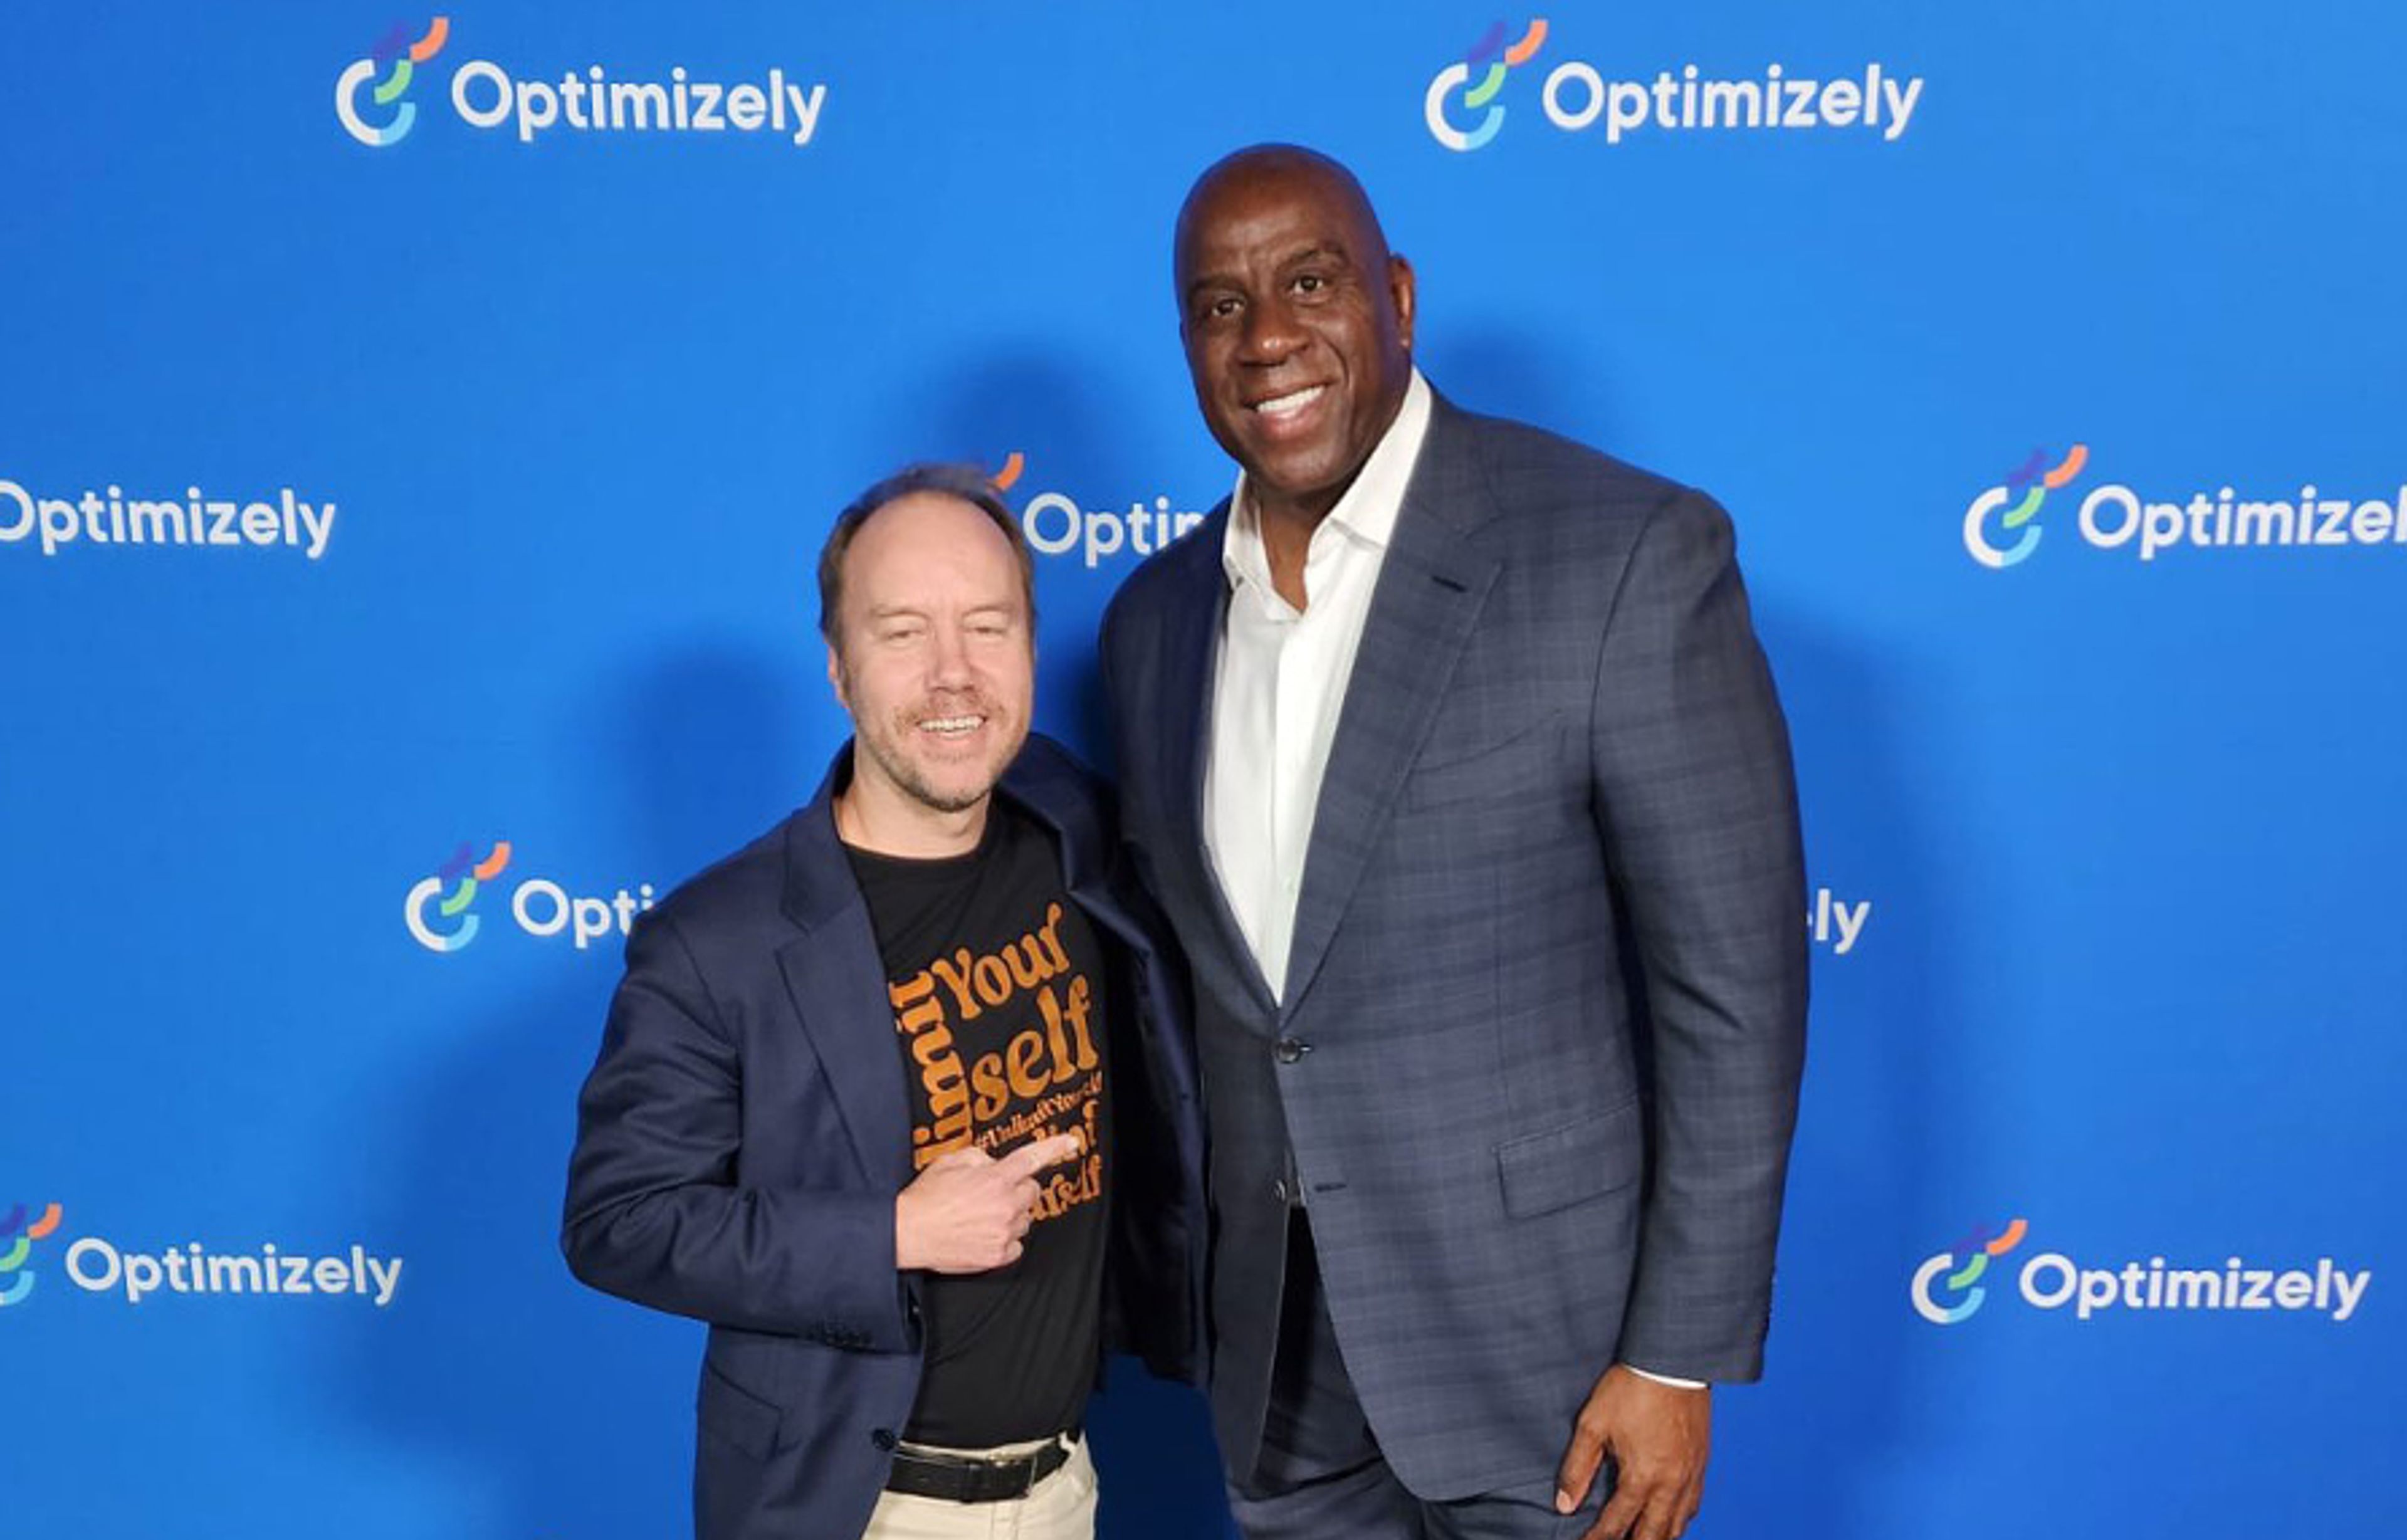 Image of Optimizely CEO Alex Atzberger with Earvin "Magic" Johnson at Opticon 2022